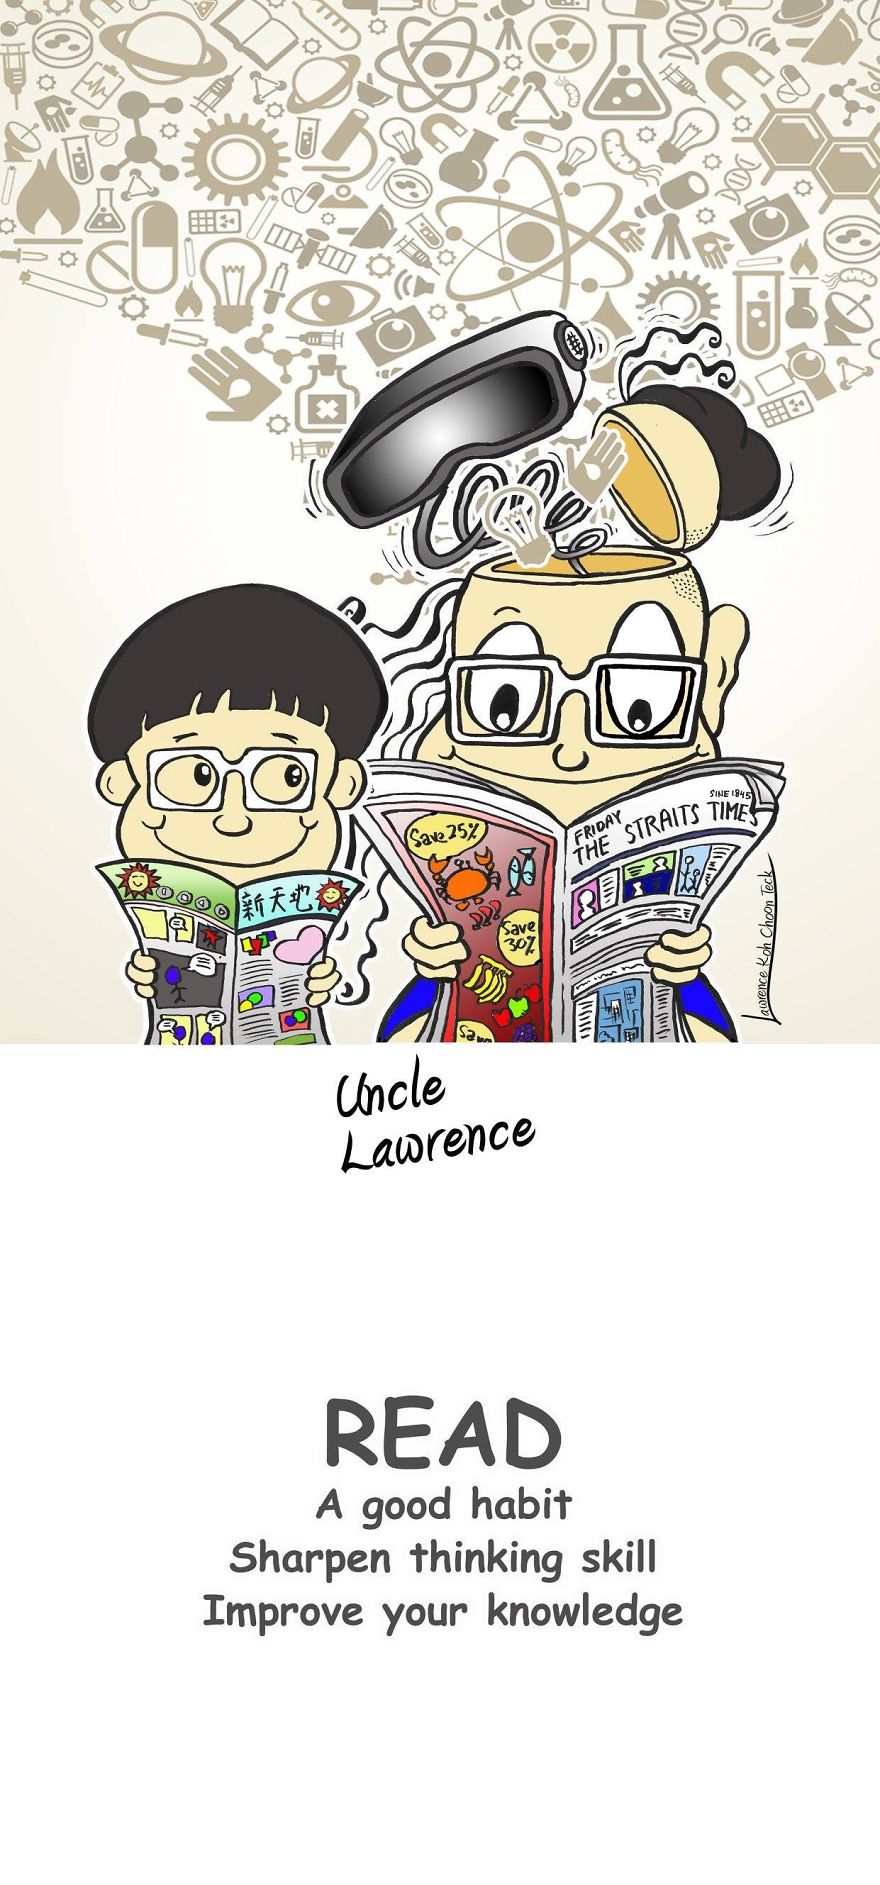 Completed A Family Comic Book "Uncle Lawrence" After 2 Years. Posted Most Of The Comics For Your Viewing Pleasure.